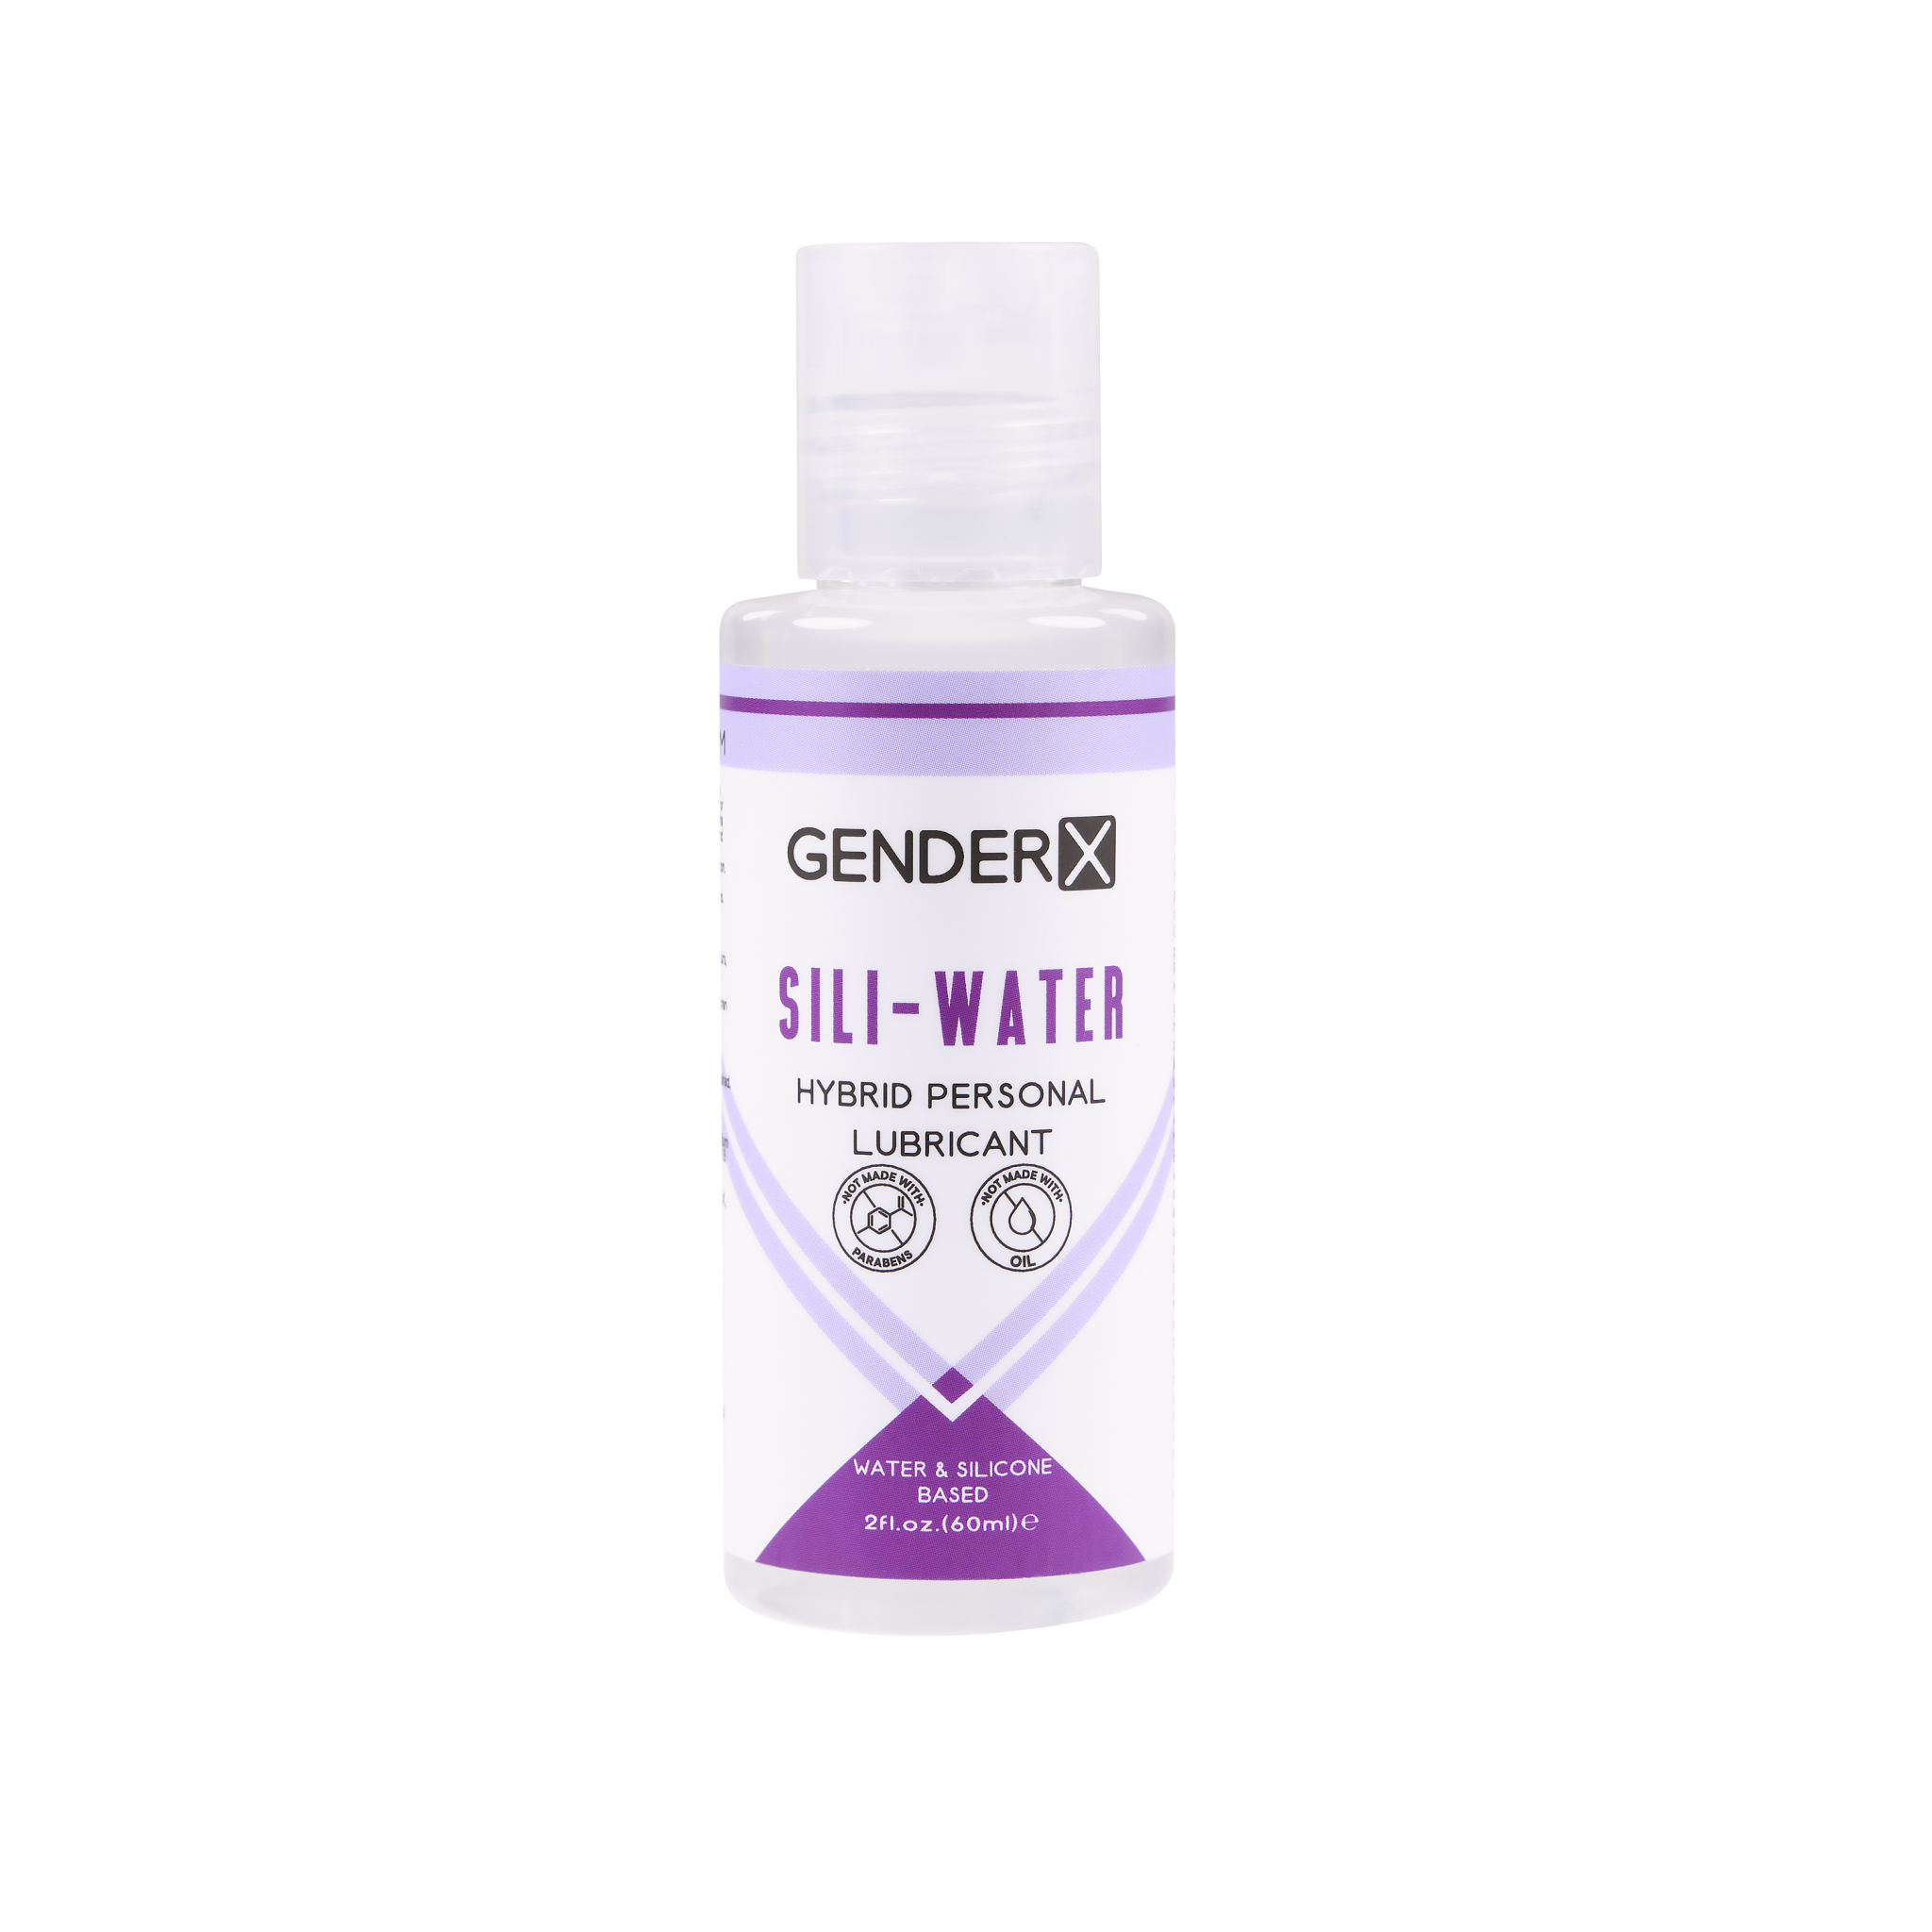 GENDER X SILI-WATER 2 OZ - Click Image to Close